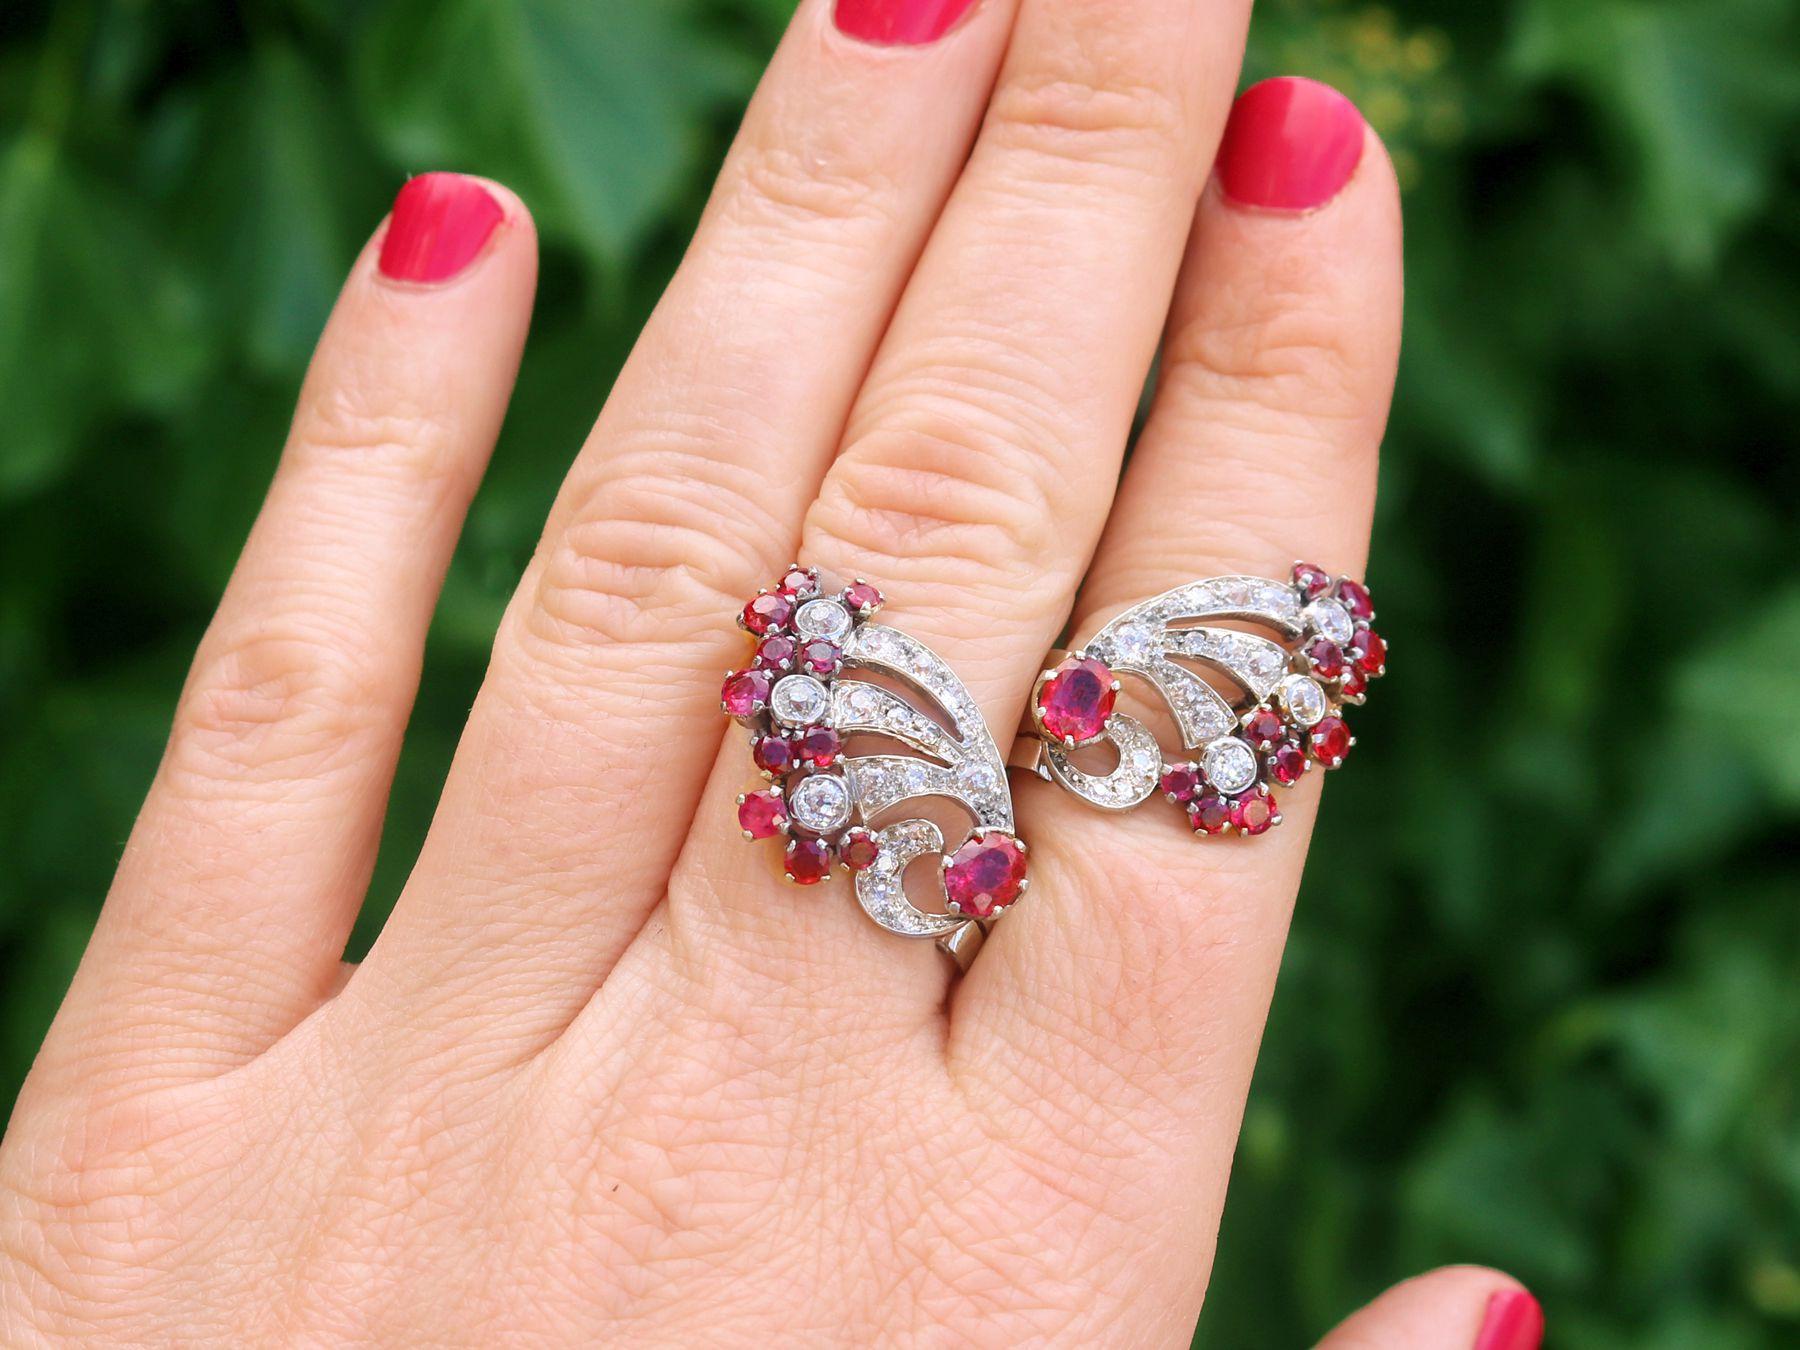 A stunning, fine and impressive pair of antique 3.02 carat Burmese ruby and 2.10 carat diamond, platinum and 9 karat white gold clip on earrings; part of our diverse antique jewellery and estate jewelry collections

These stunning, fine and